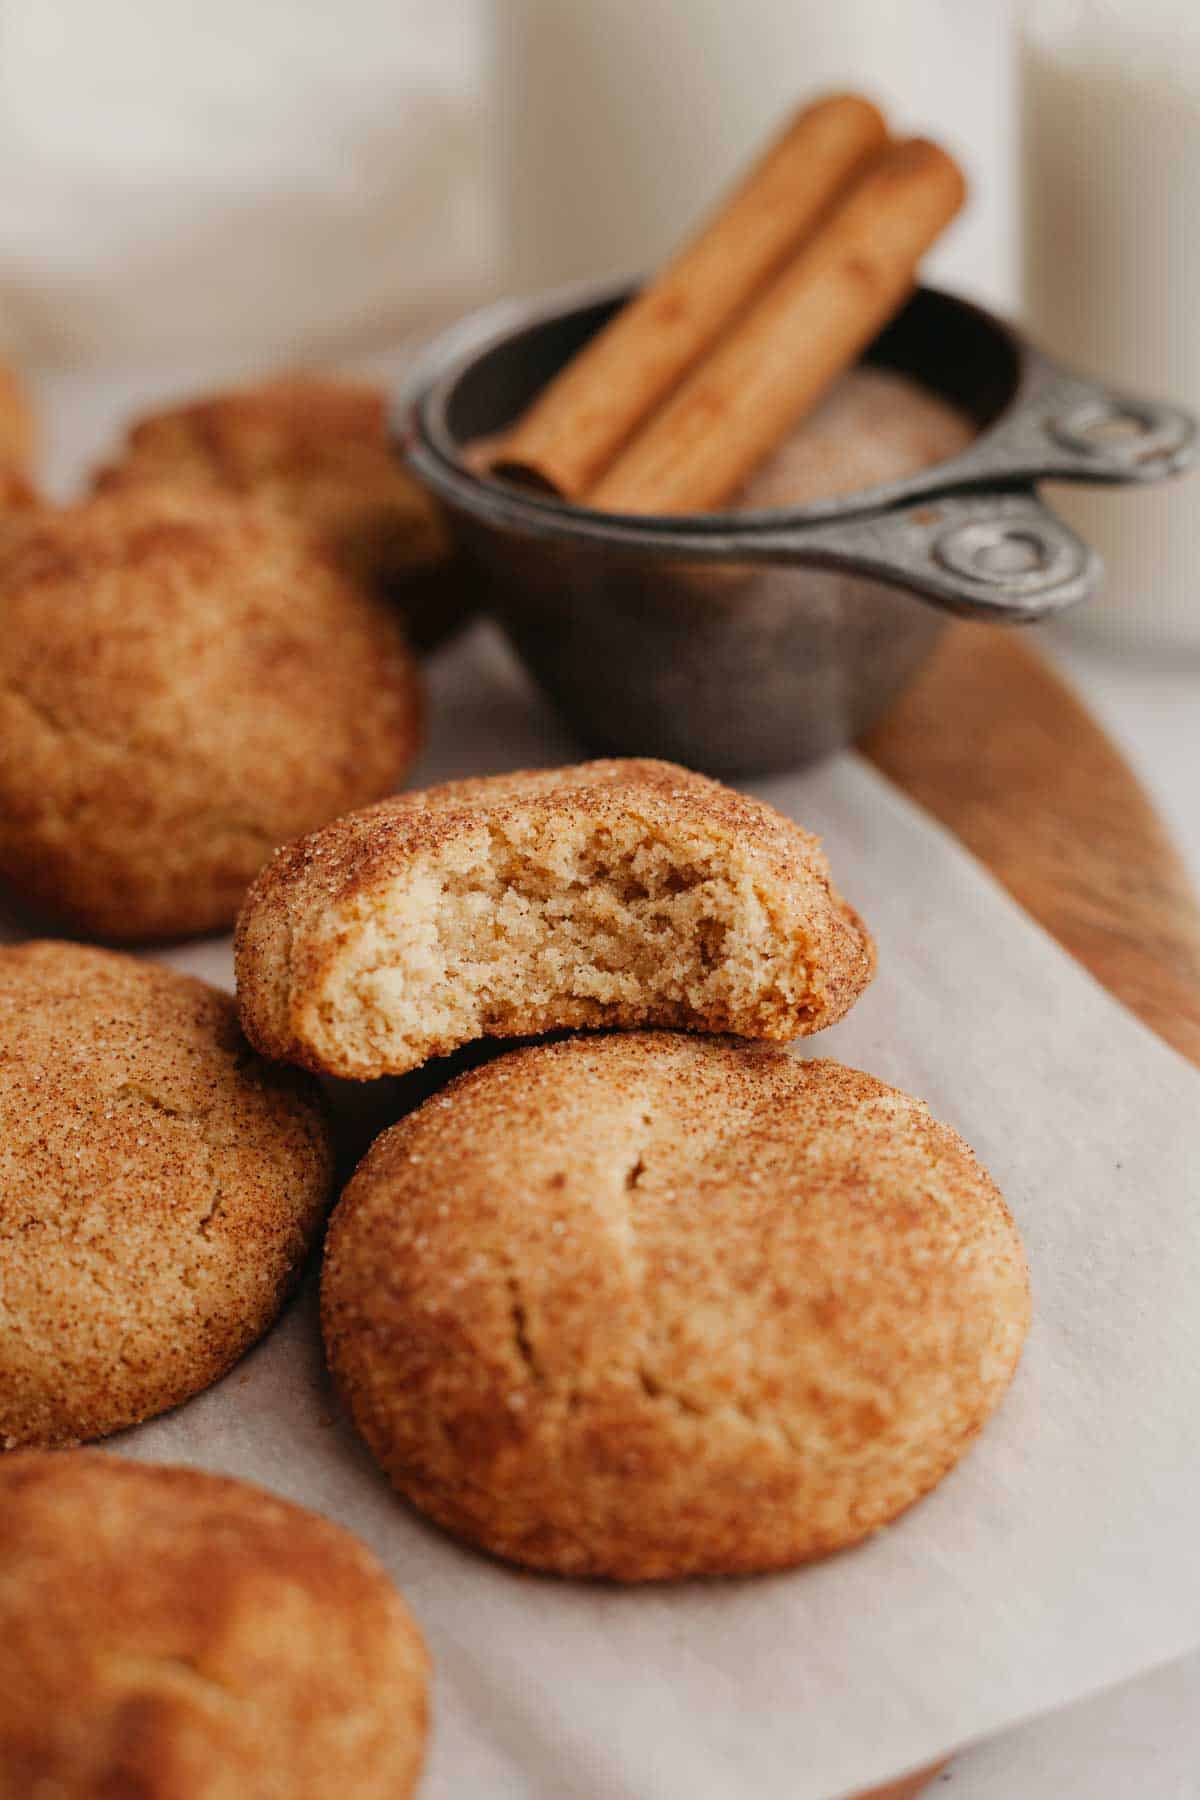 Several snickerdoodles on parchment paper, one has a bite taken out of it.